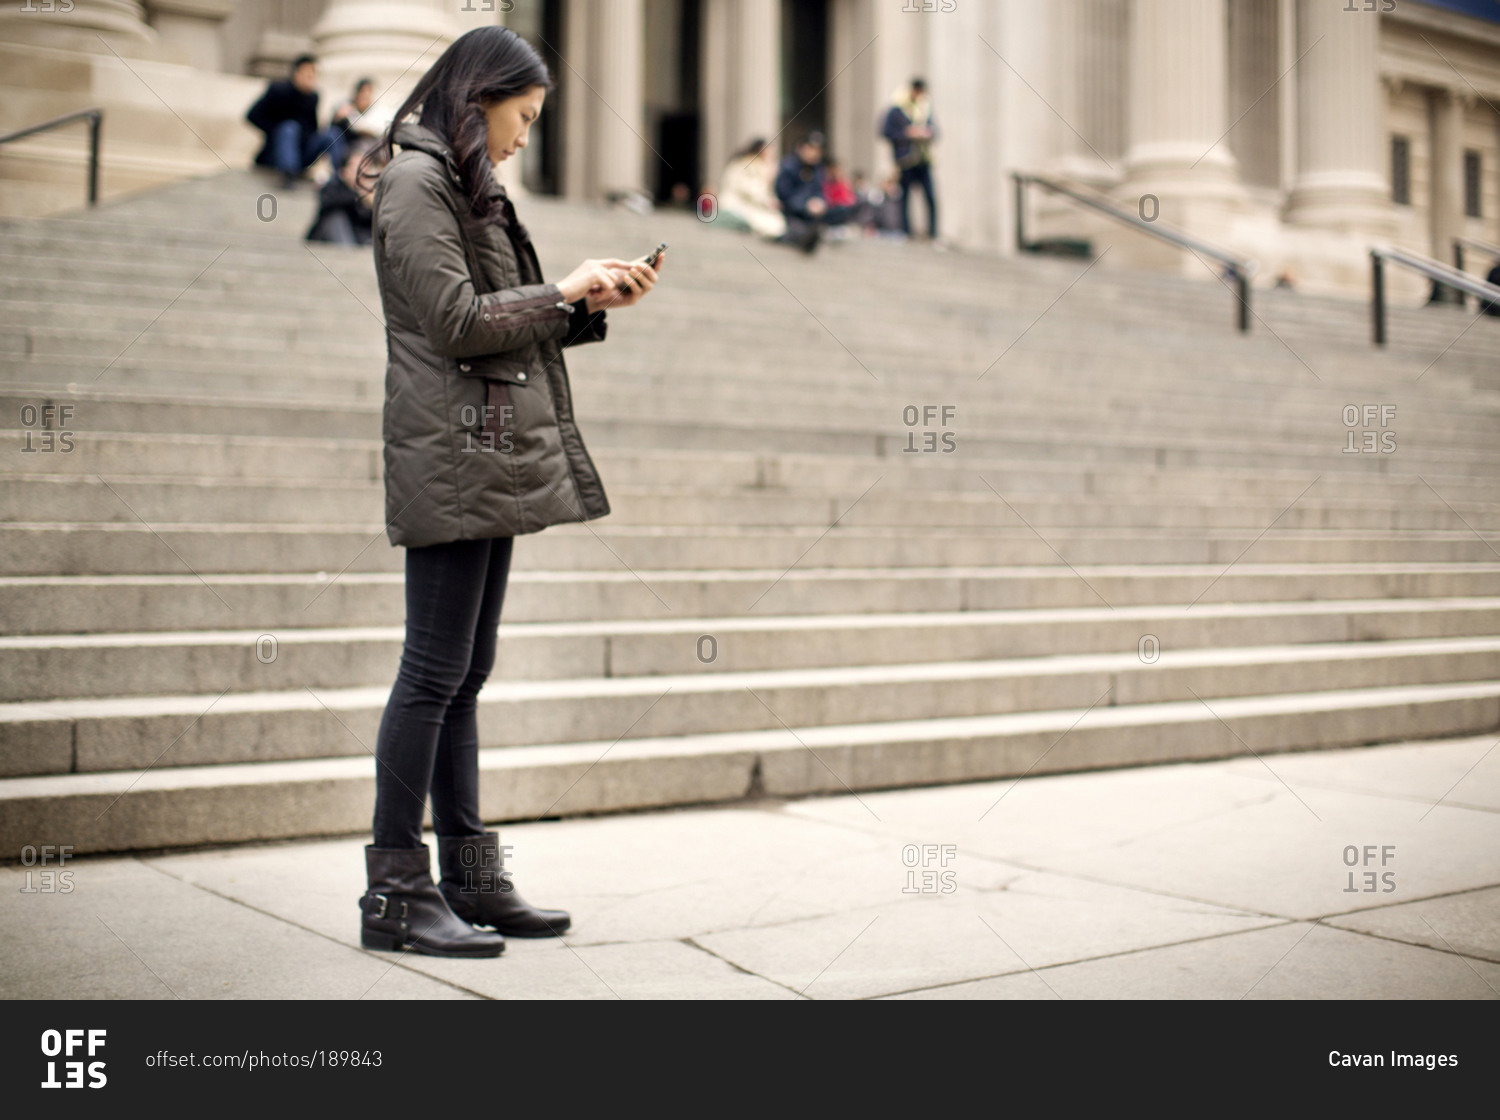 Woman using smartphone by museum steps